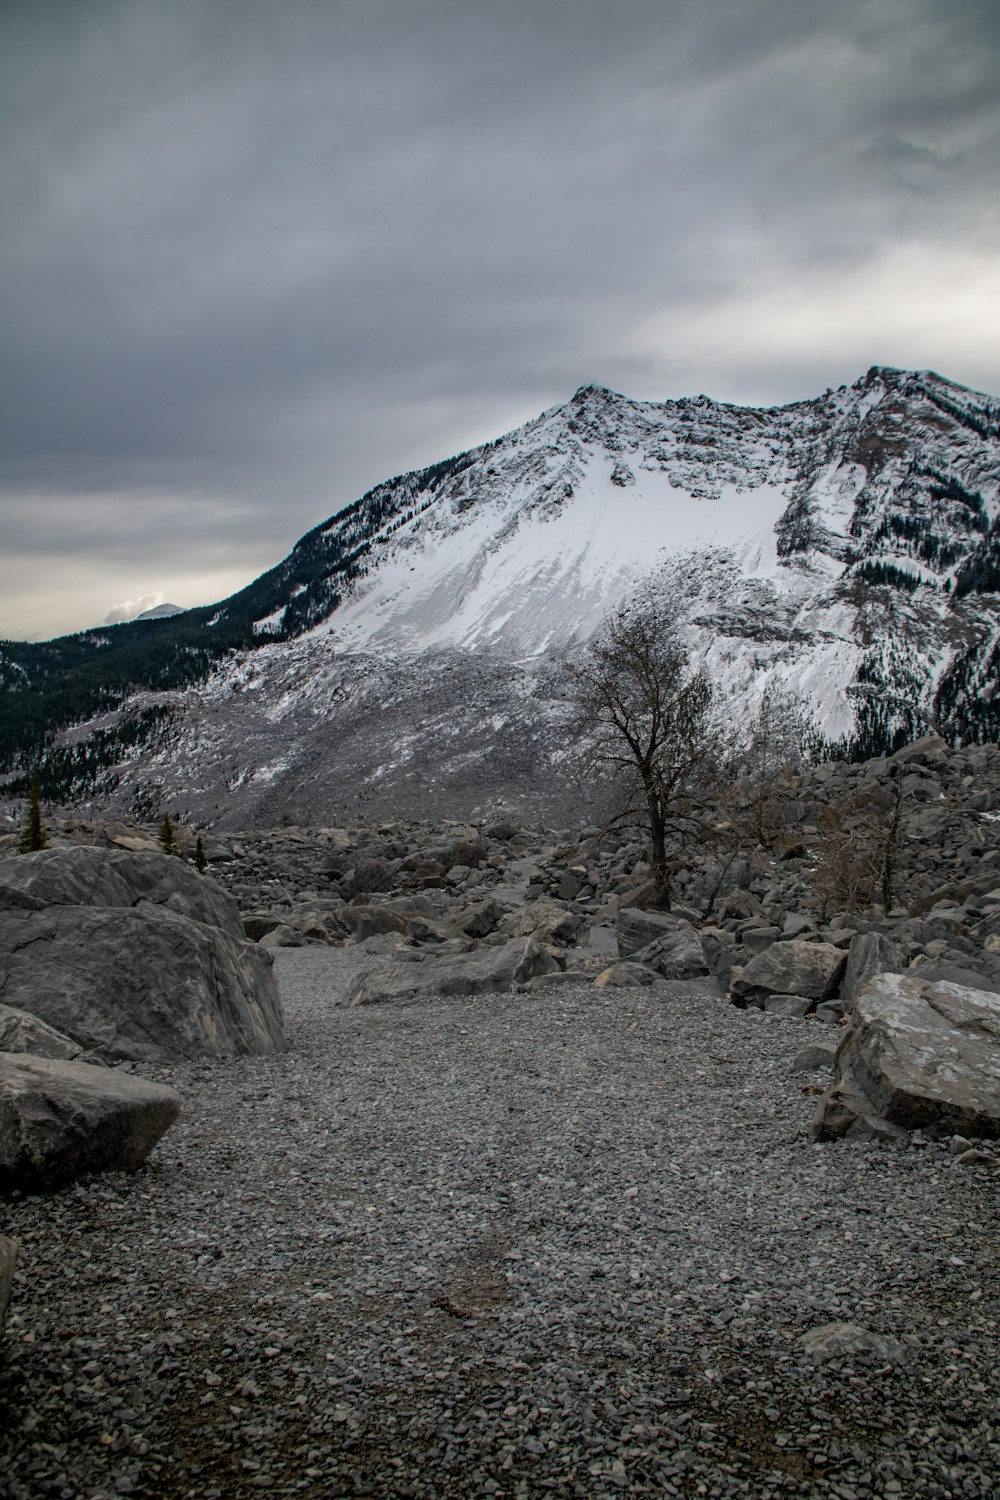 a mountain covered in snow and rocks under a cloudy sky